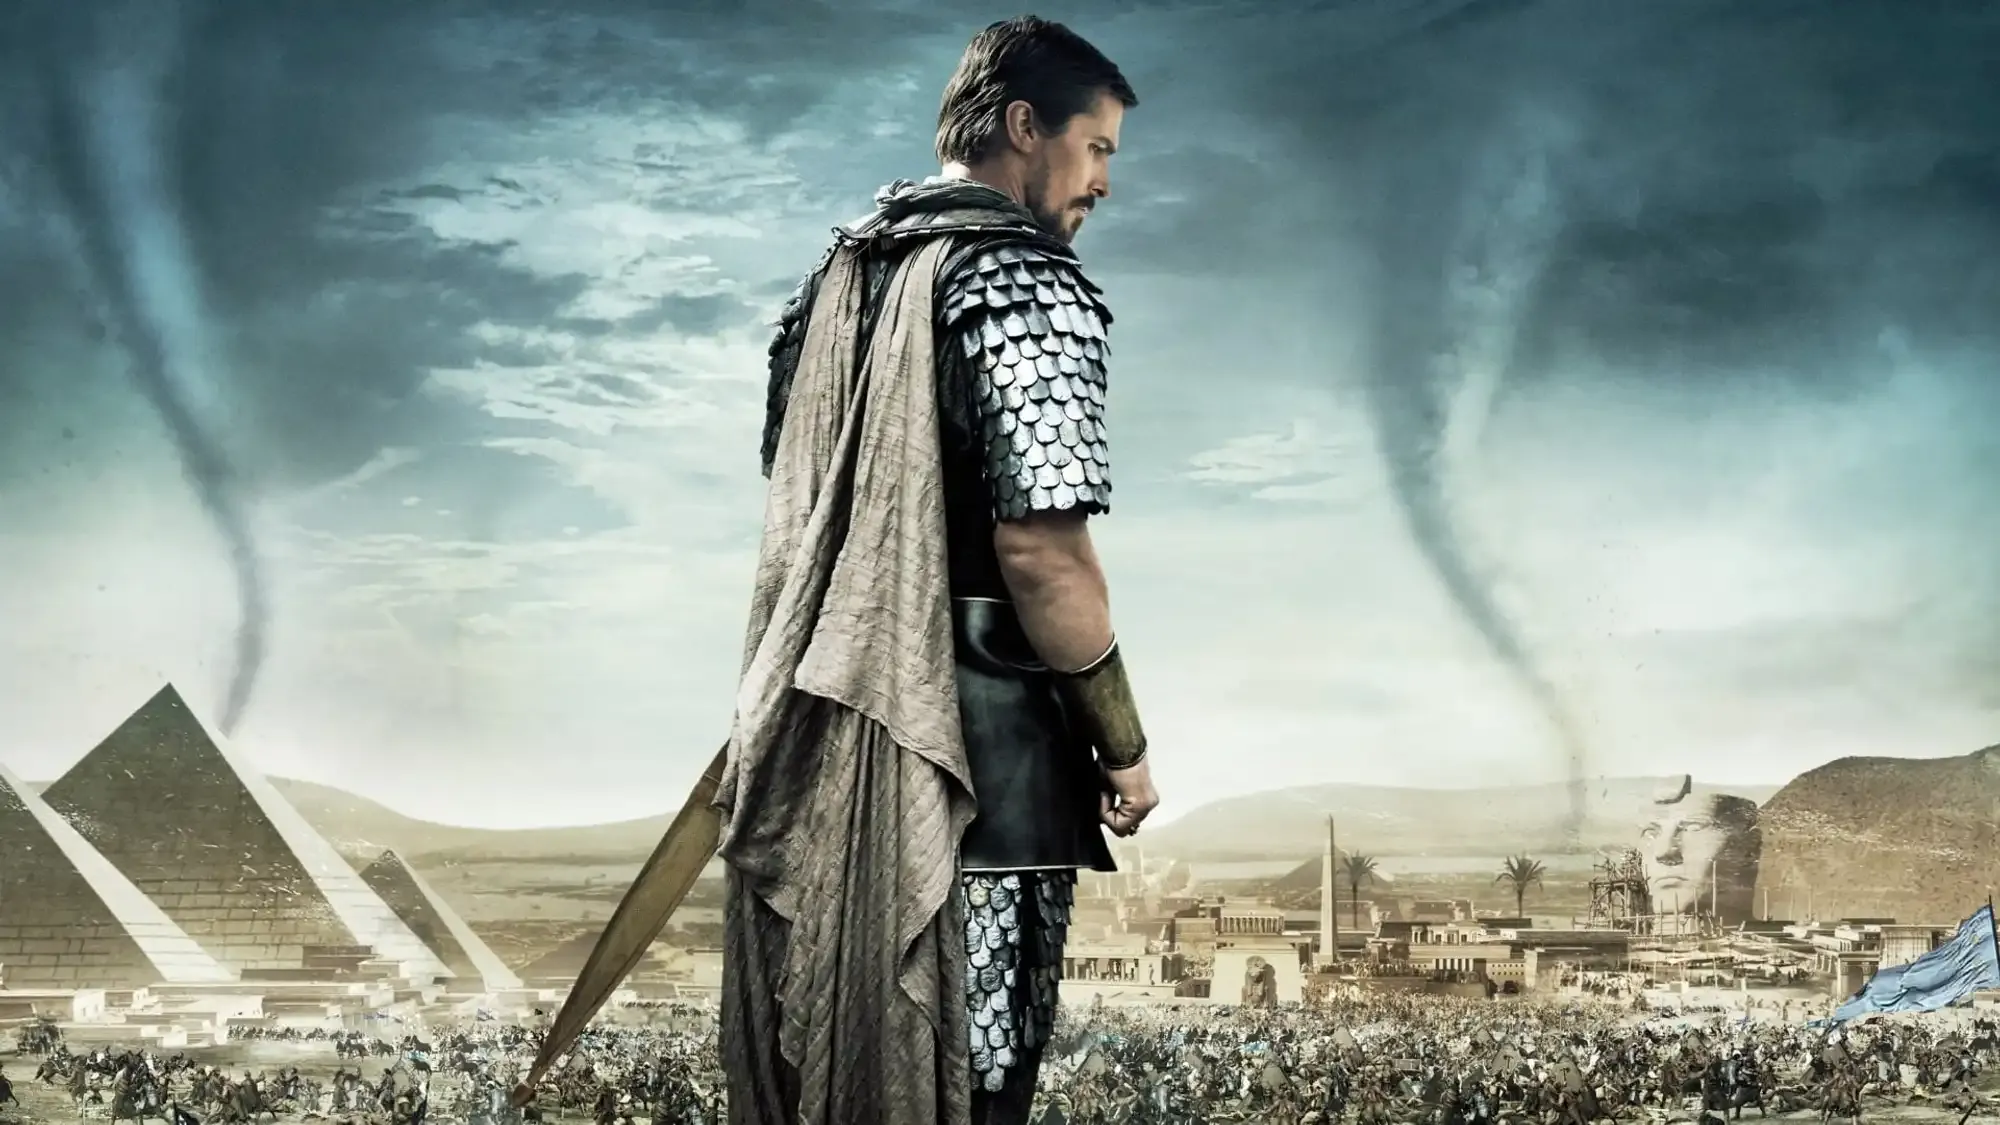 Exodus: Gods and Kings movie review